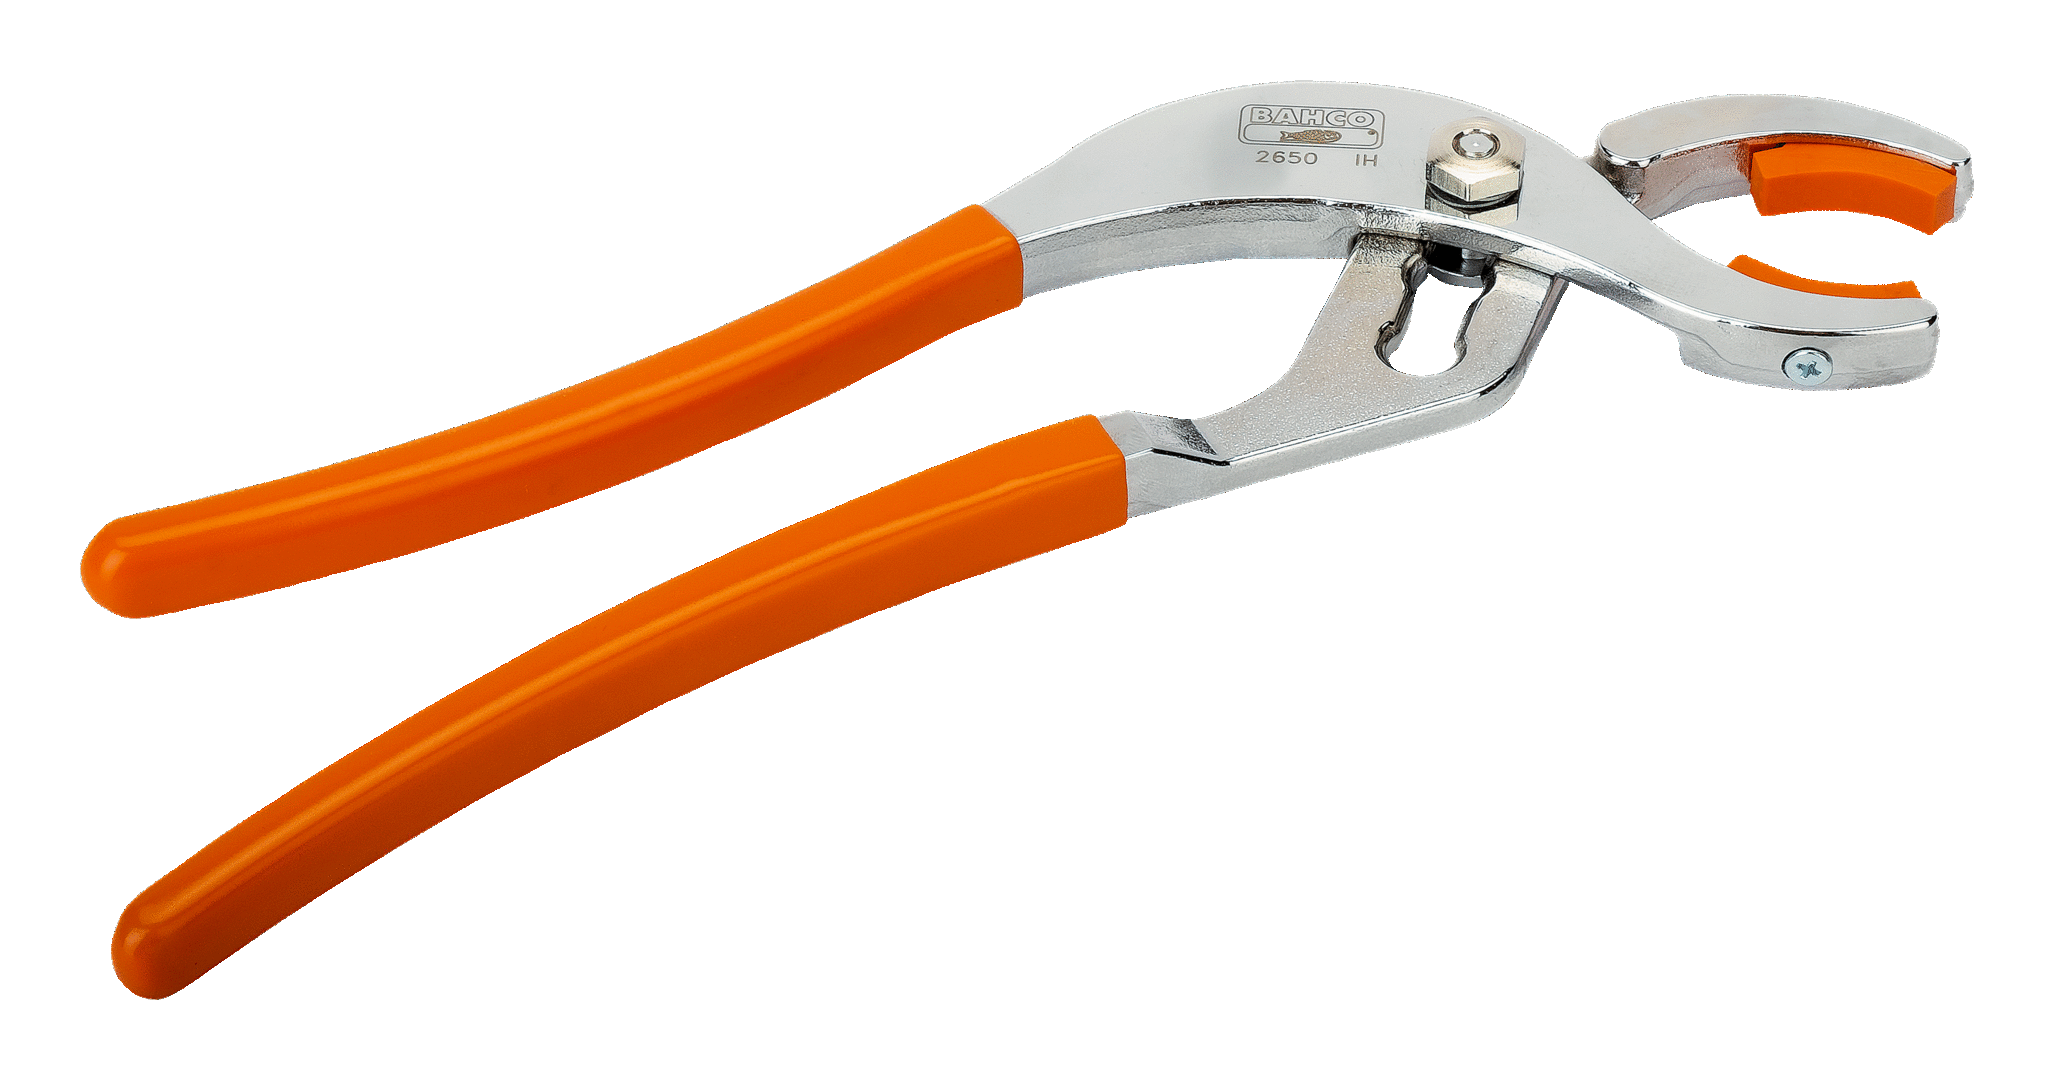 Connector Pliers with PVC Coated Handles and Chrome Finish | BAHCO 